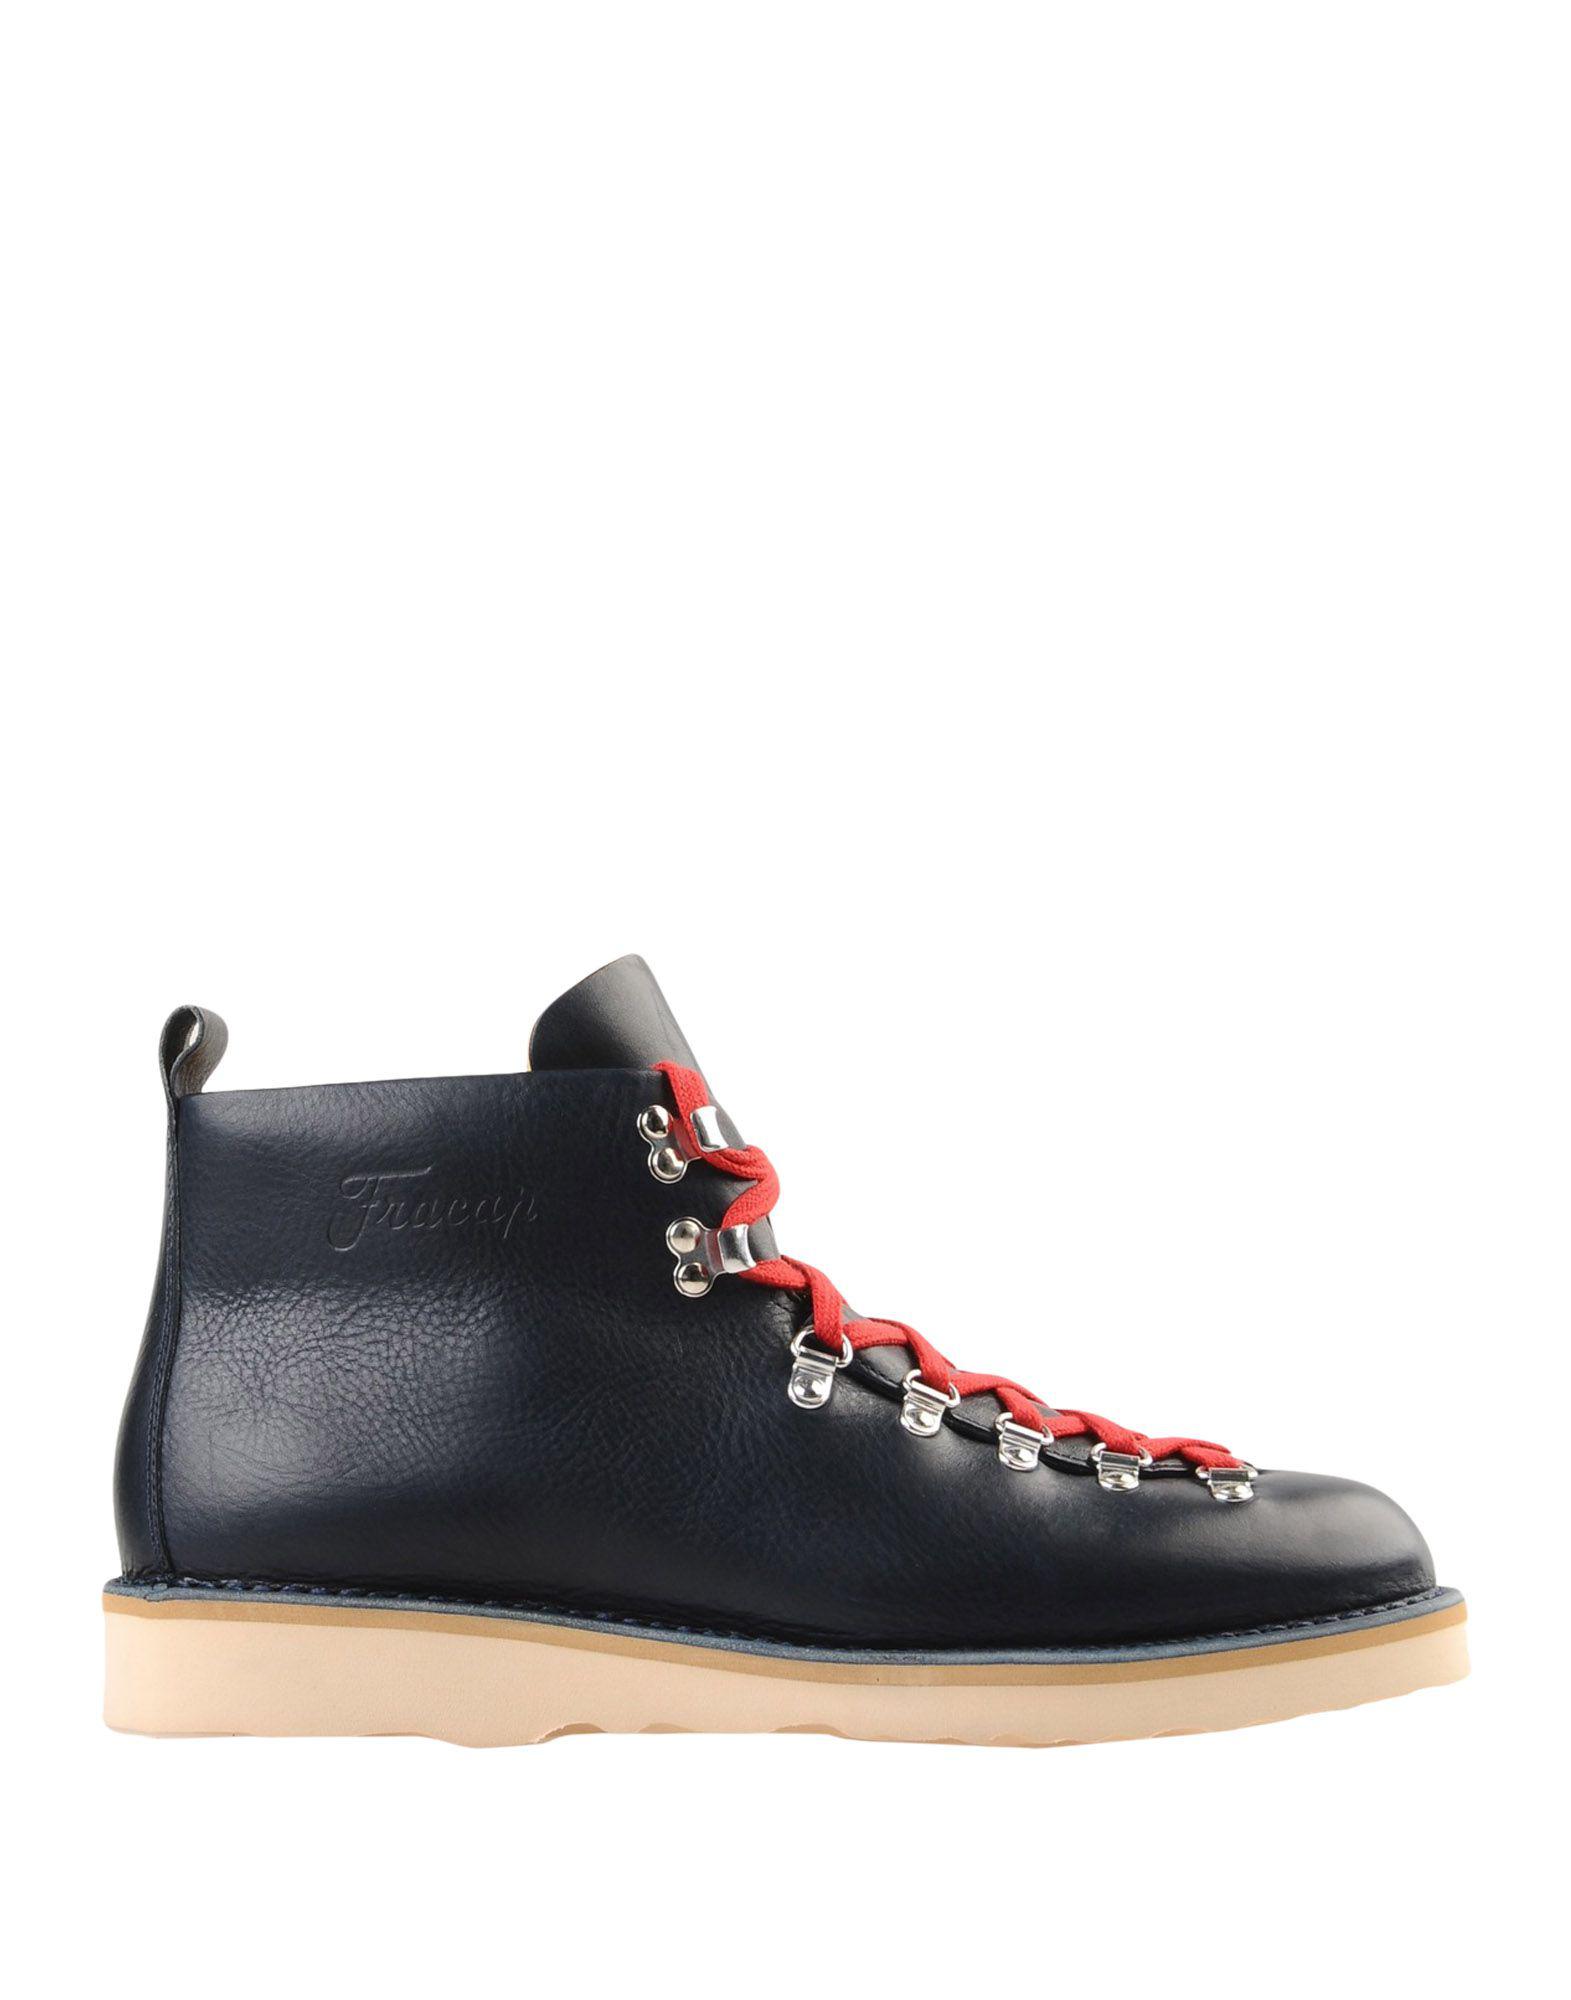 Fracap Leather Ankle Boots in Dark Blue (Blue) for Men - Lyst